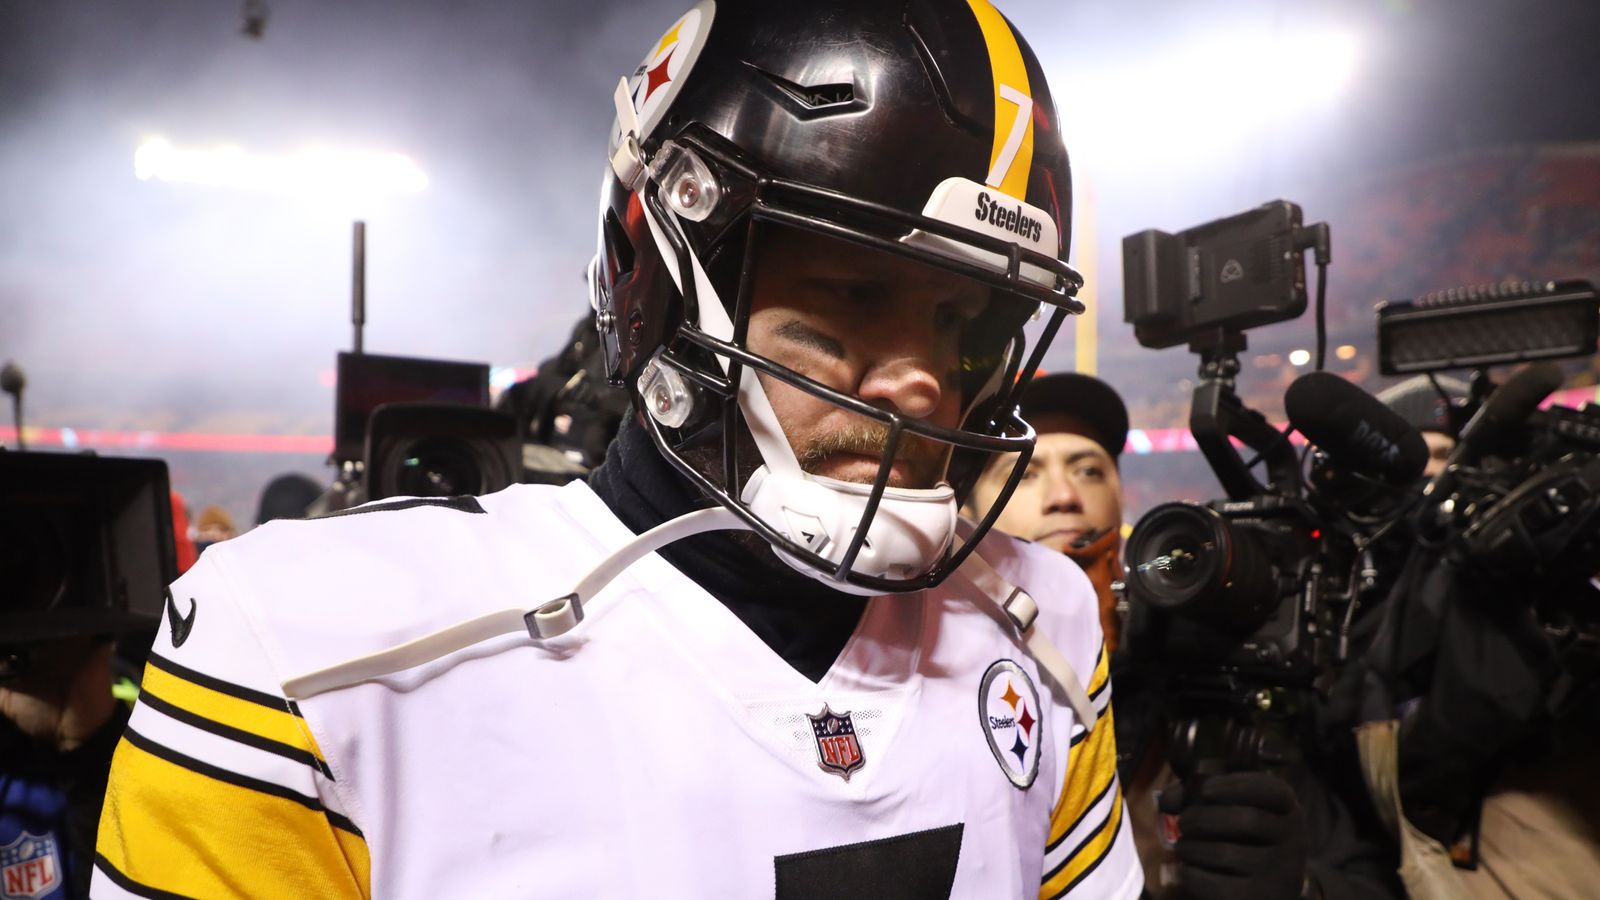 Pittsburgh Steelers 21-42 Kansas City Chiefs: Patrick Mahomes throws five touchdowns in rout of Ben Roethlisberger’s Steelers